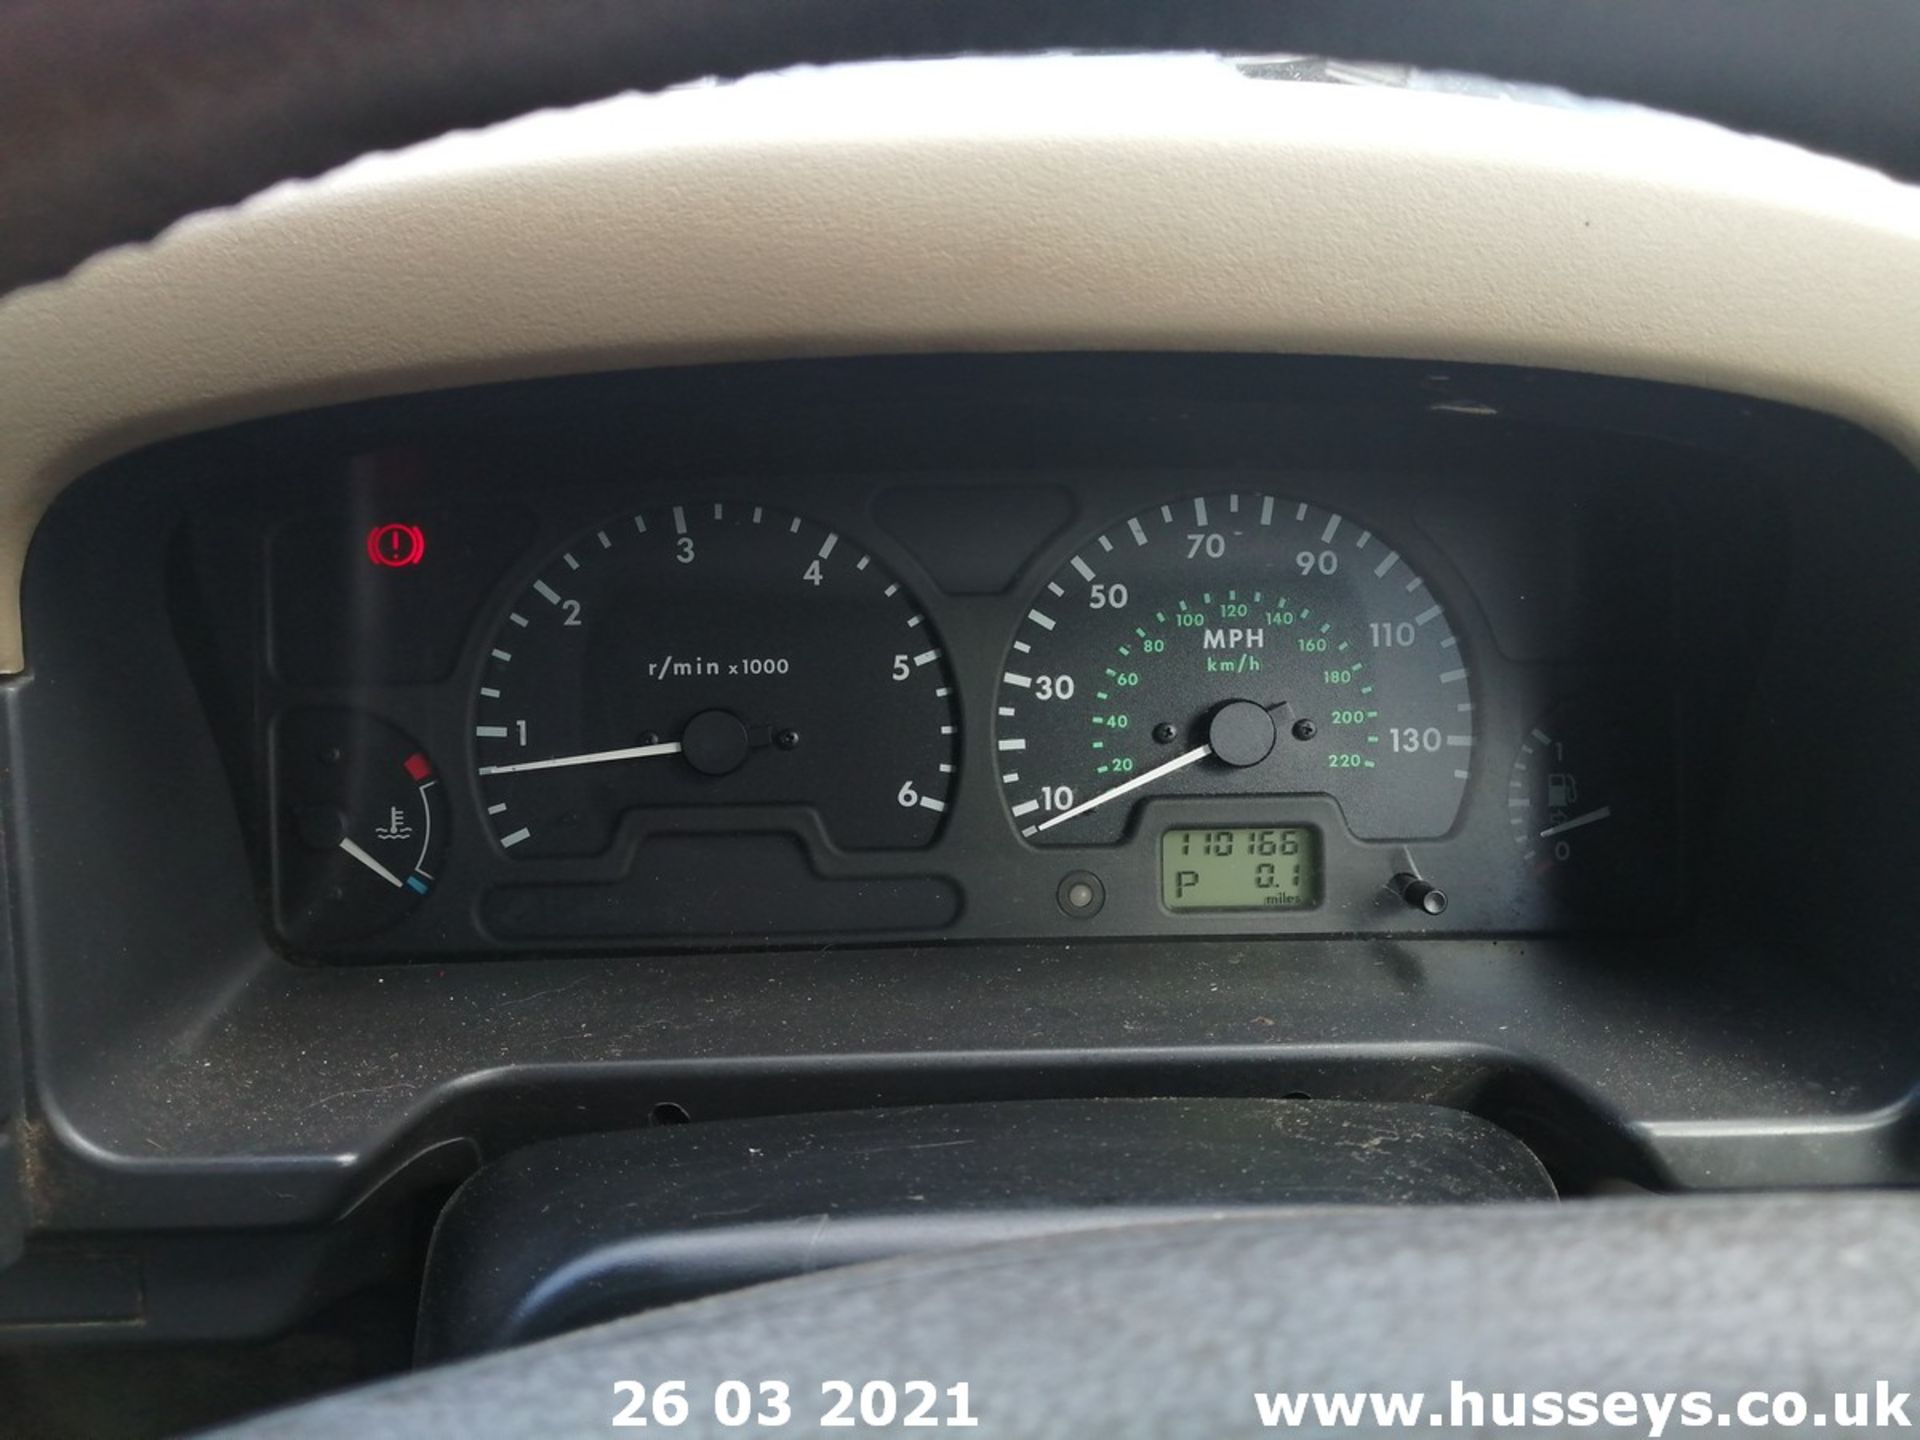 2000 LAND ROVER DISCOVERY - 2500cc 5dr Estate (Blue) - Image 19 of 23